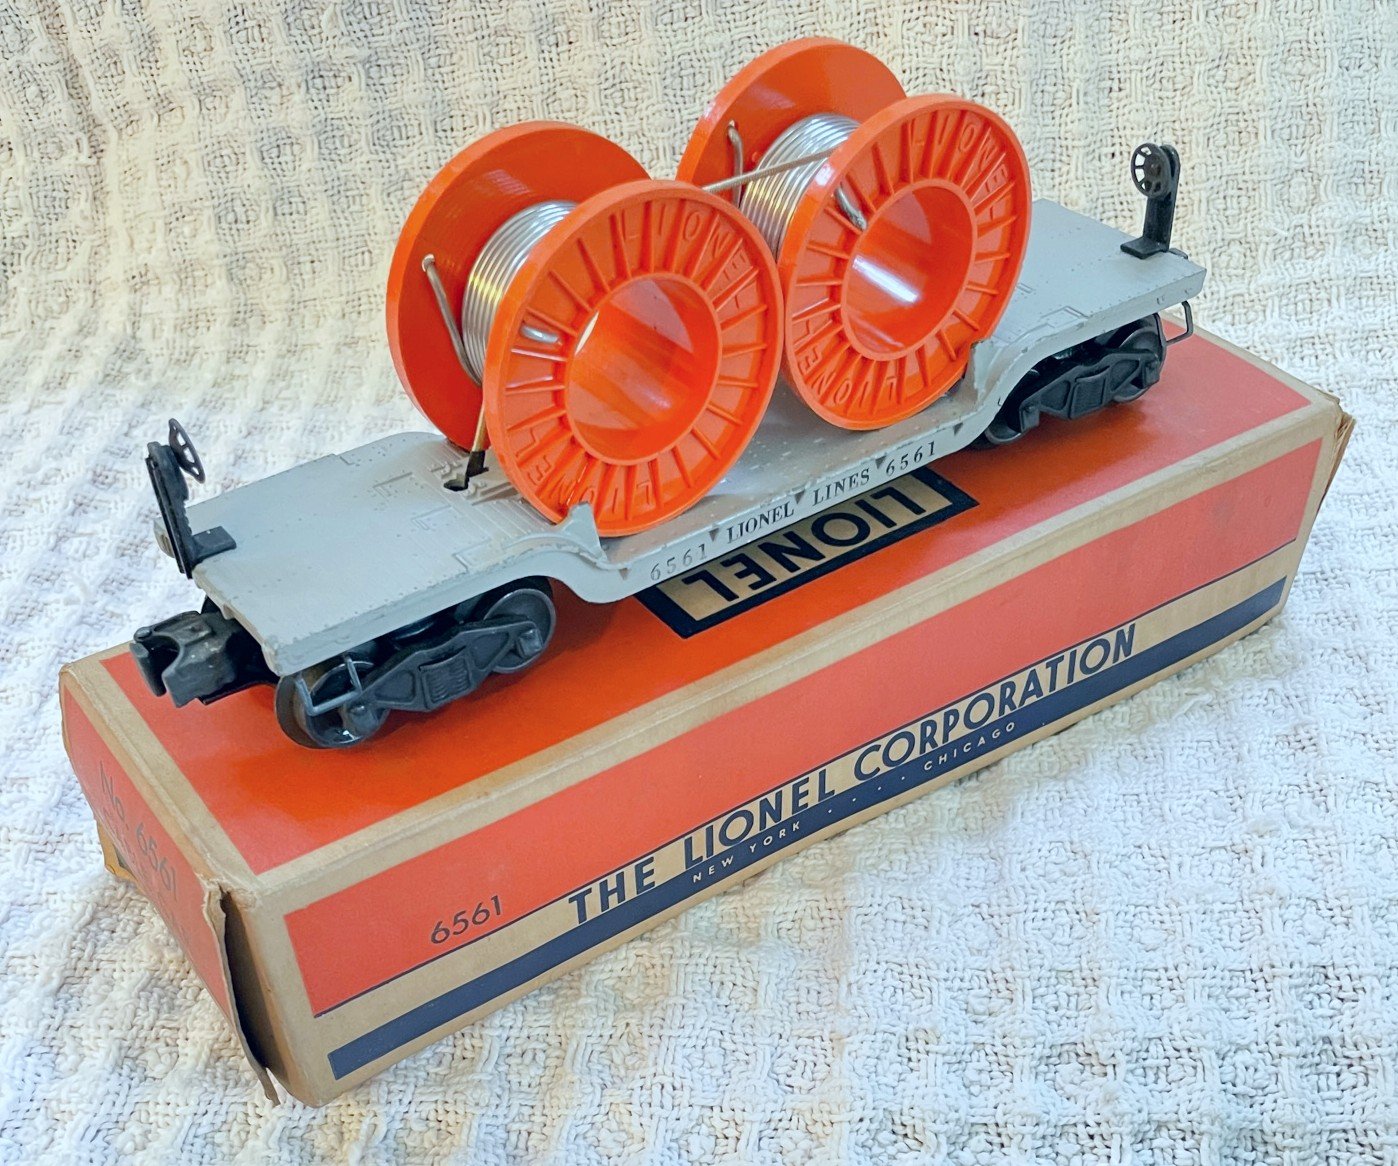 6561 Cable Reel Car - Lionel Trains Library